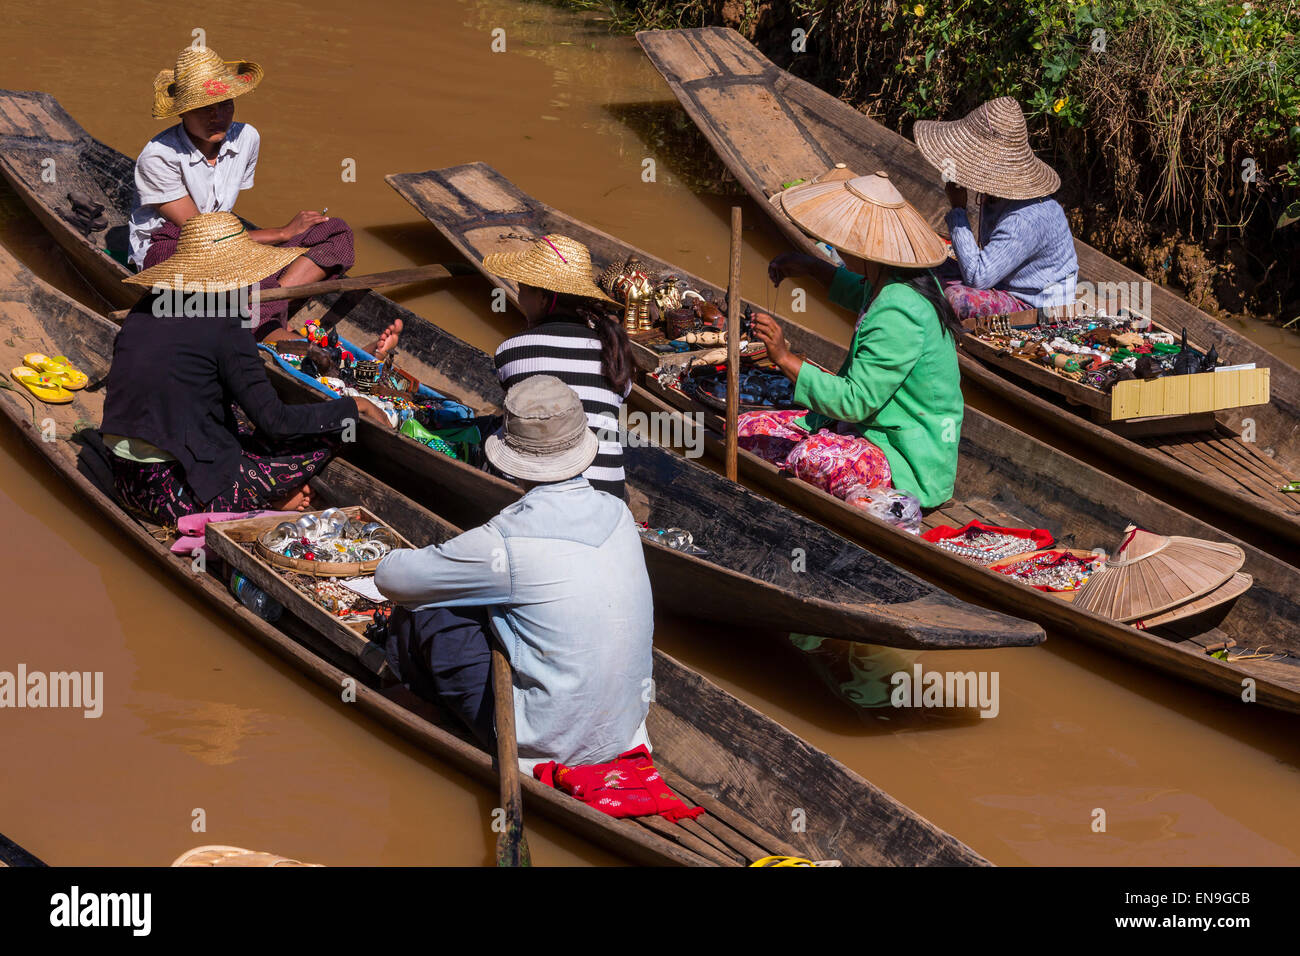 Boat venders selling products in the floating market of Inle Lake Stock Photo